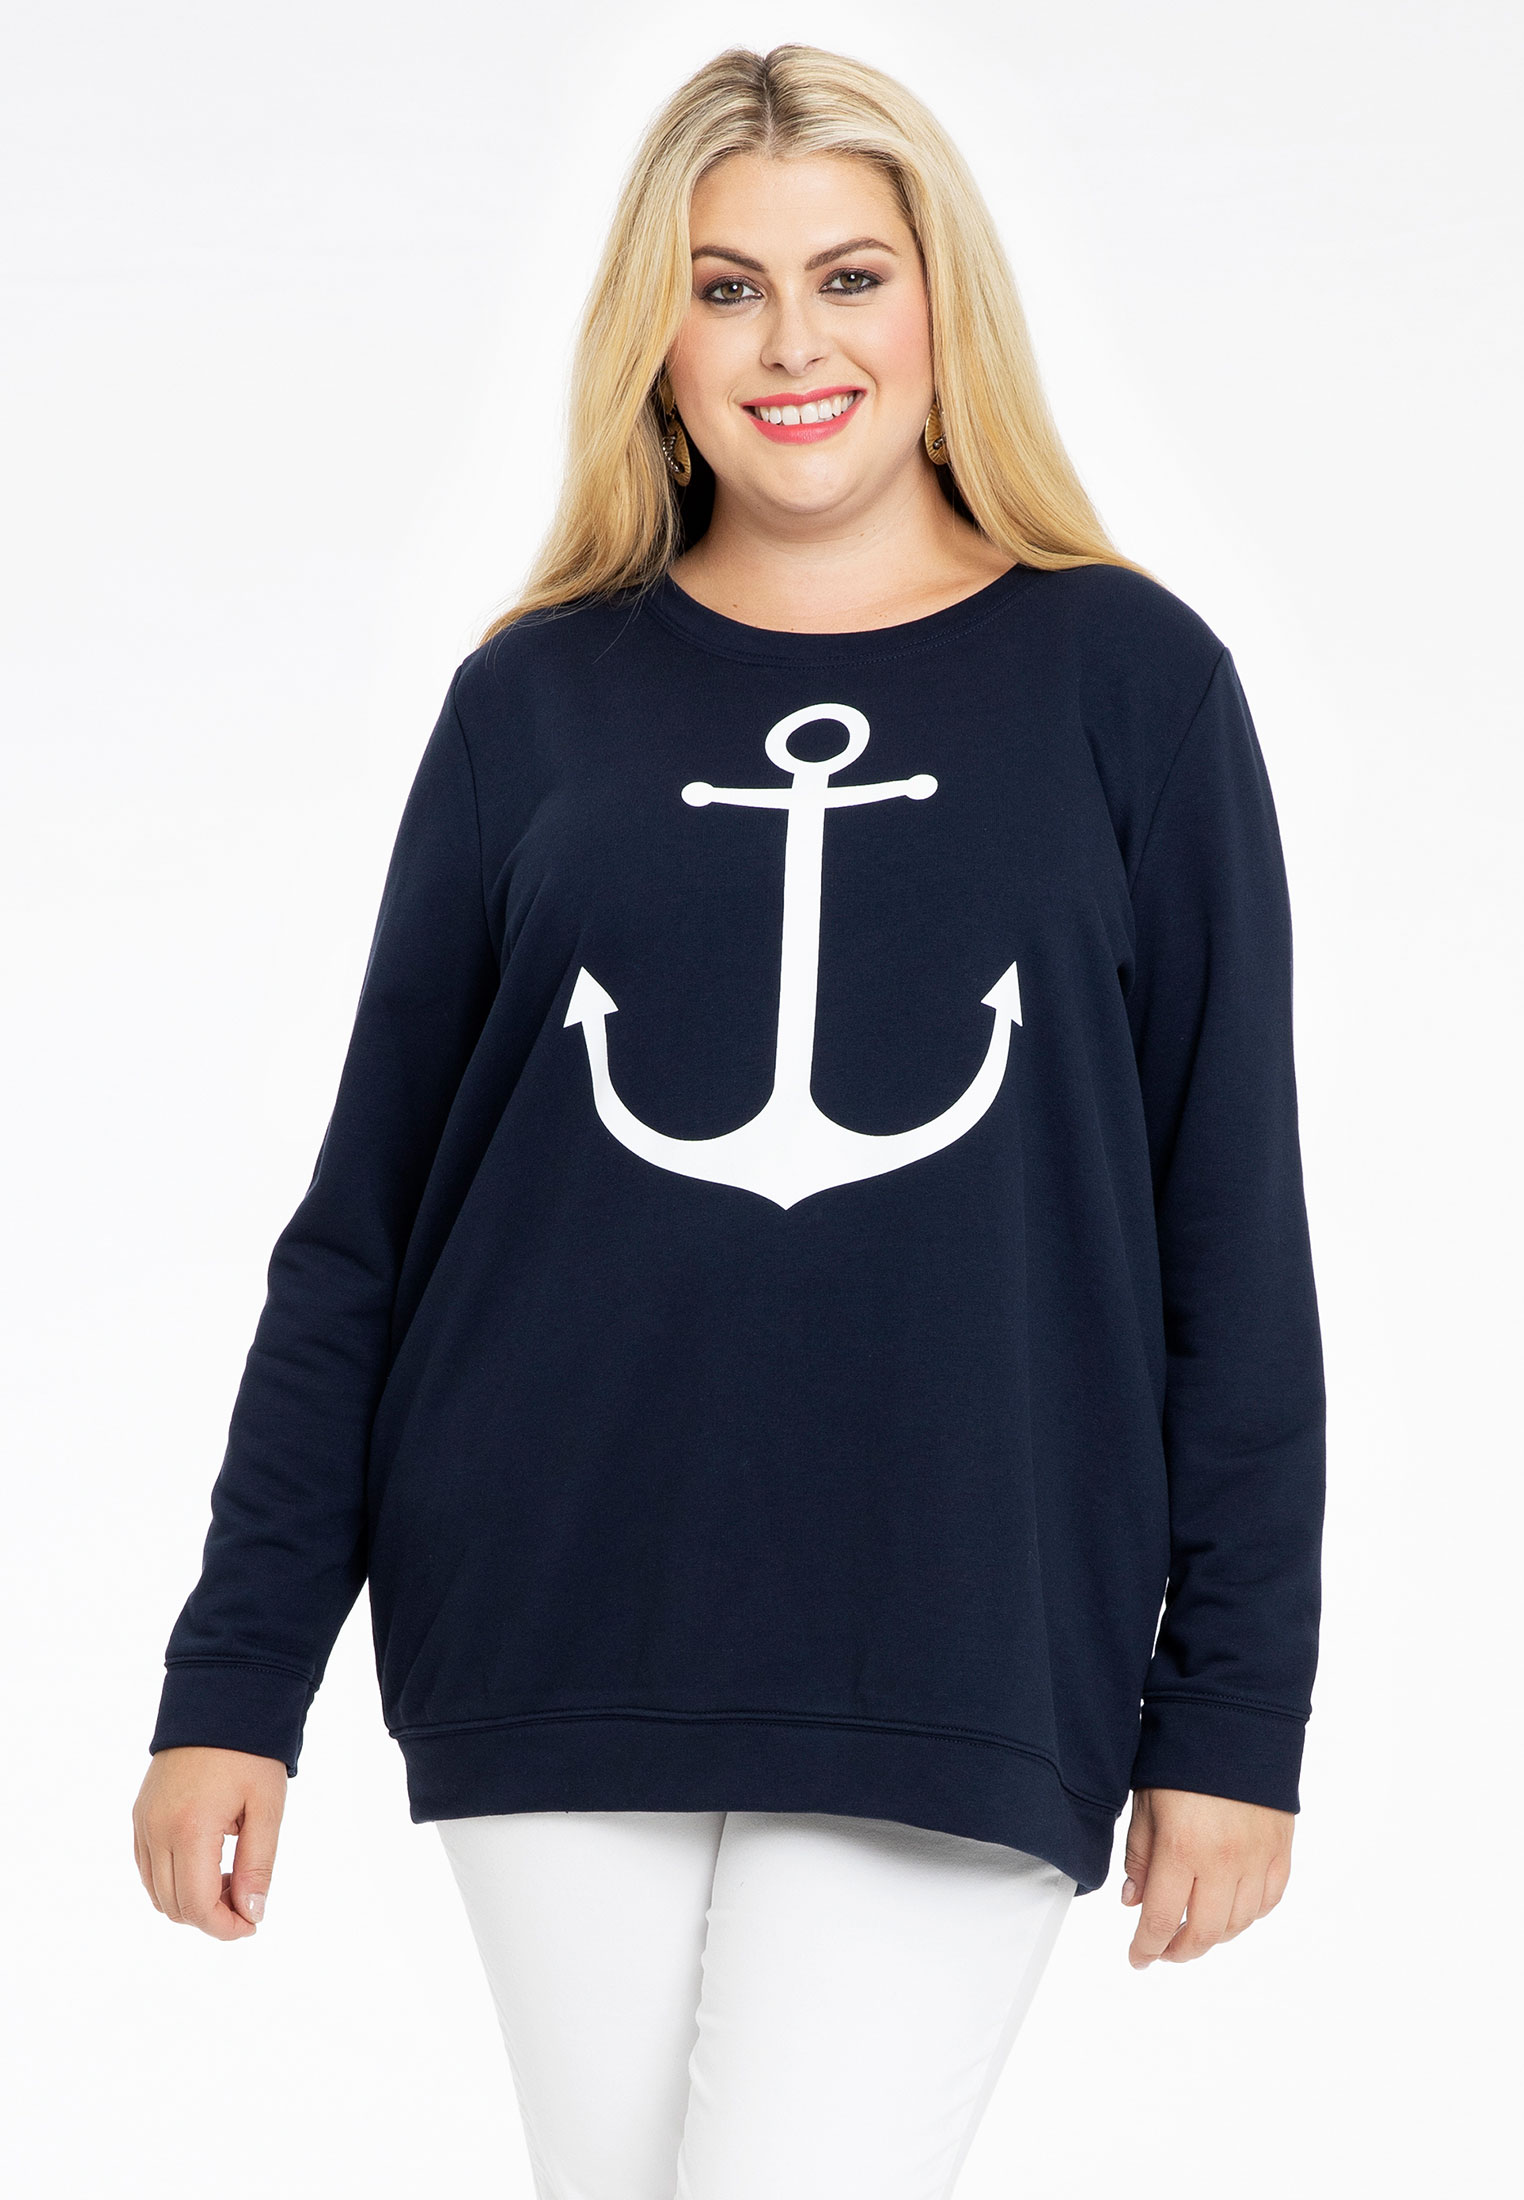 Sweater anchor 38/40 blue